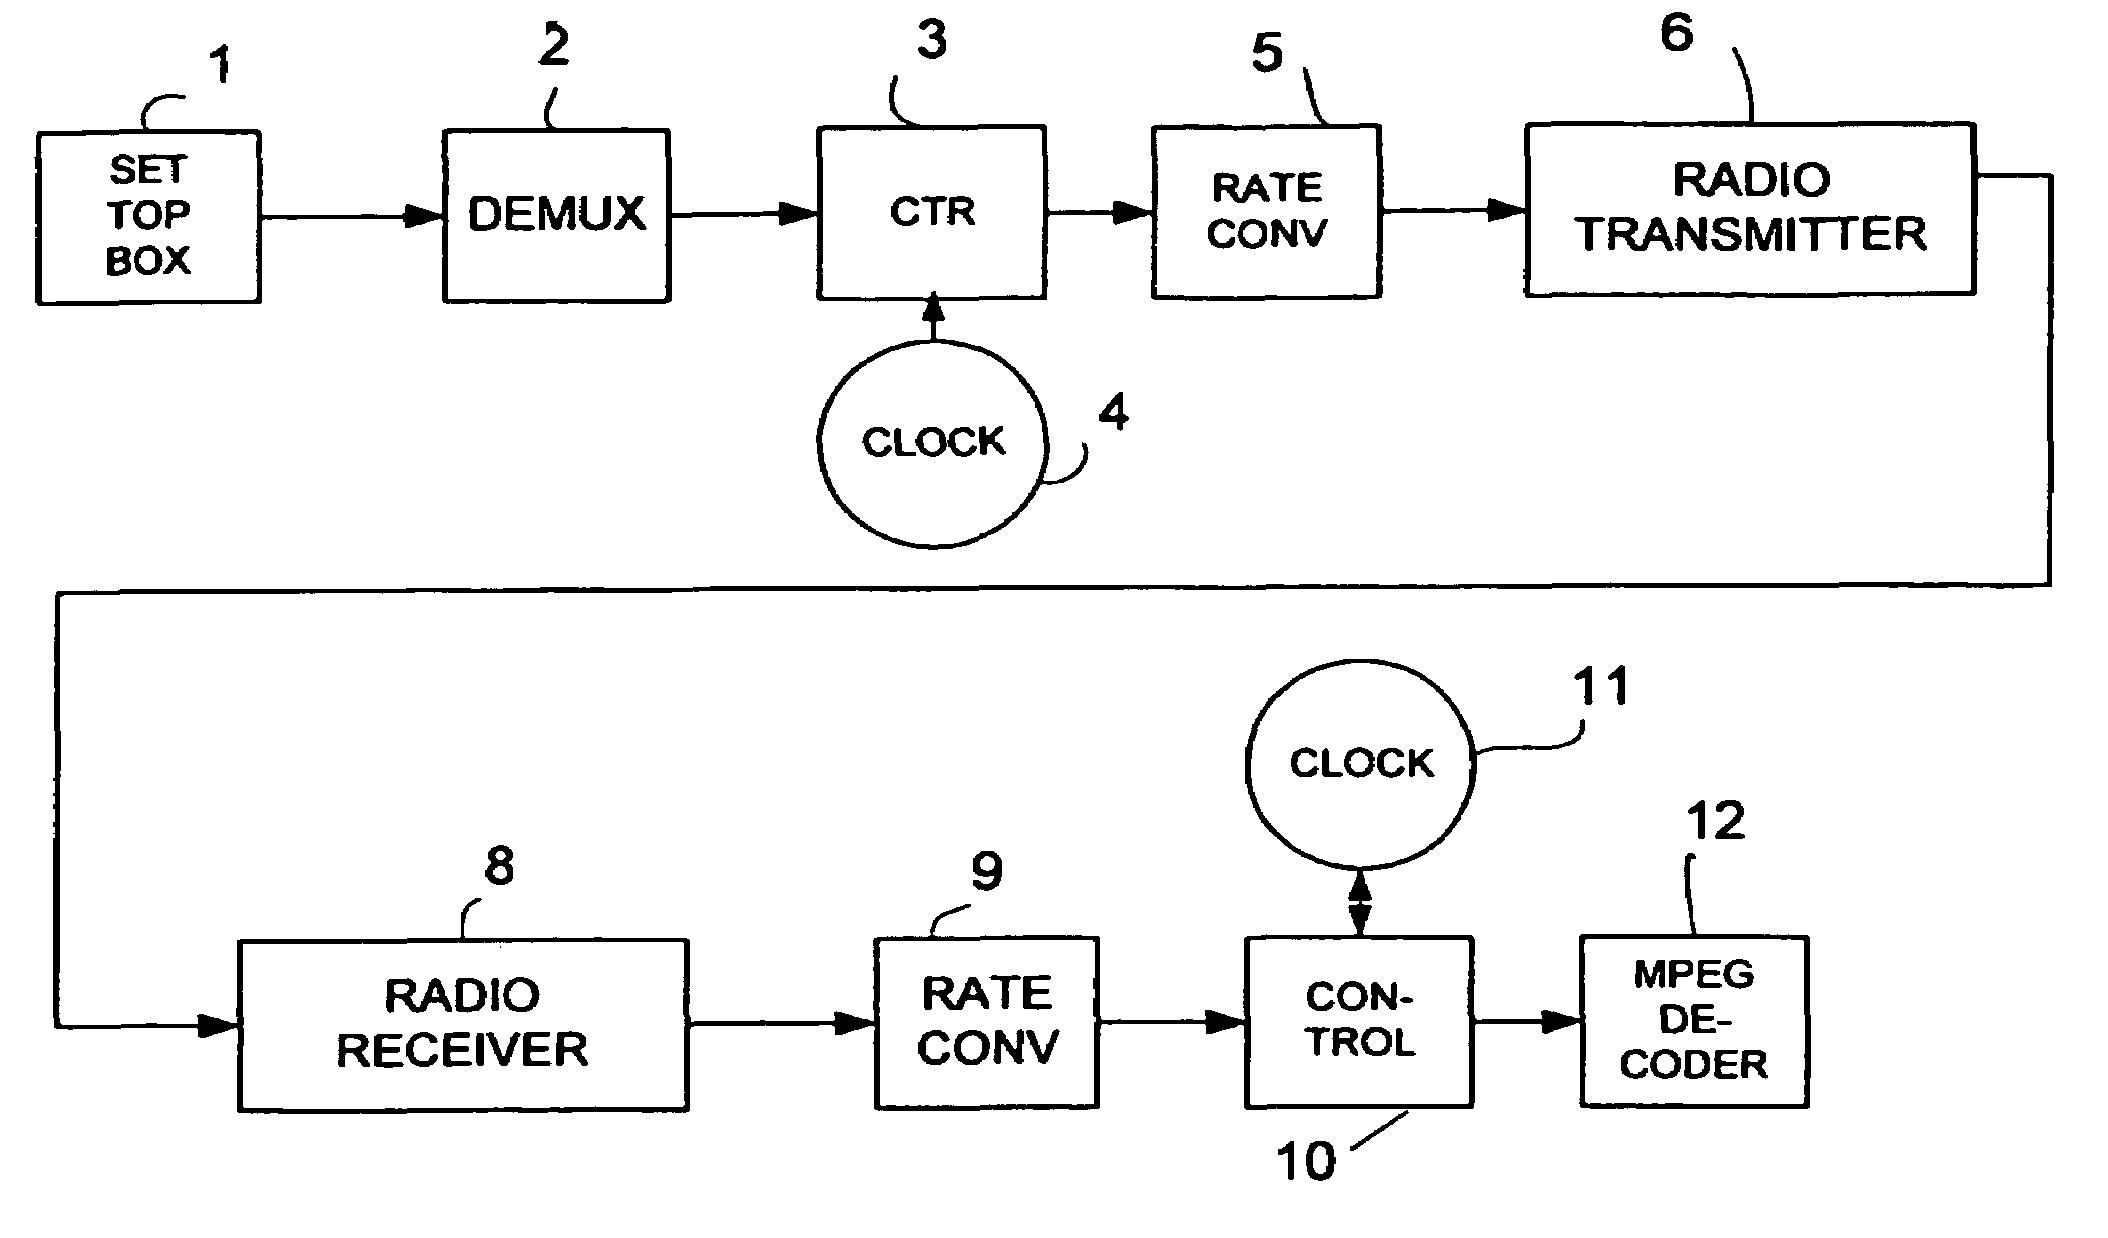 Method for transmitting time-critical data packets in digital wireless transmission systems